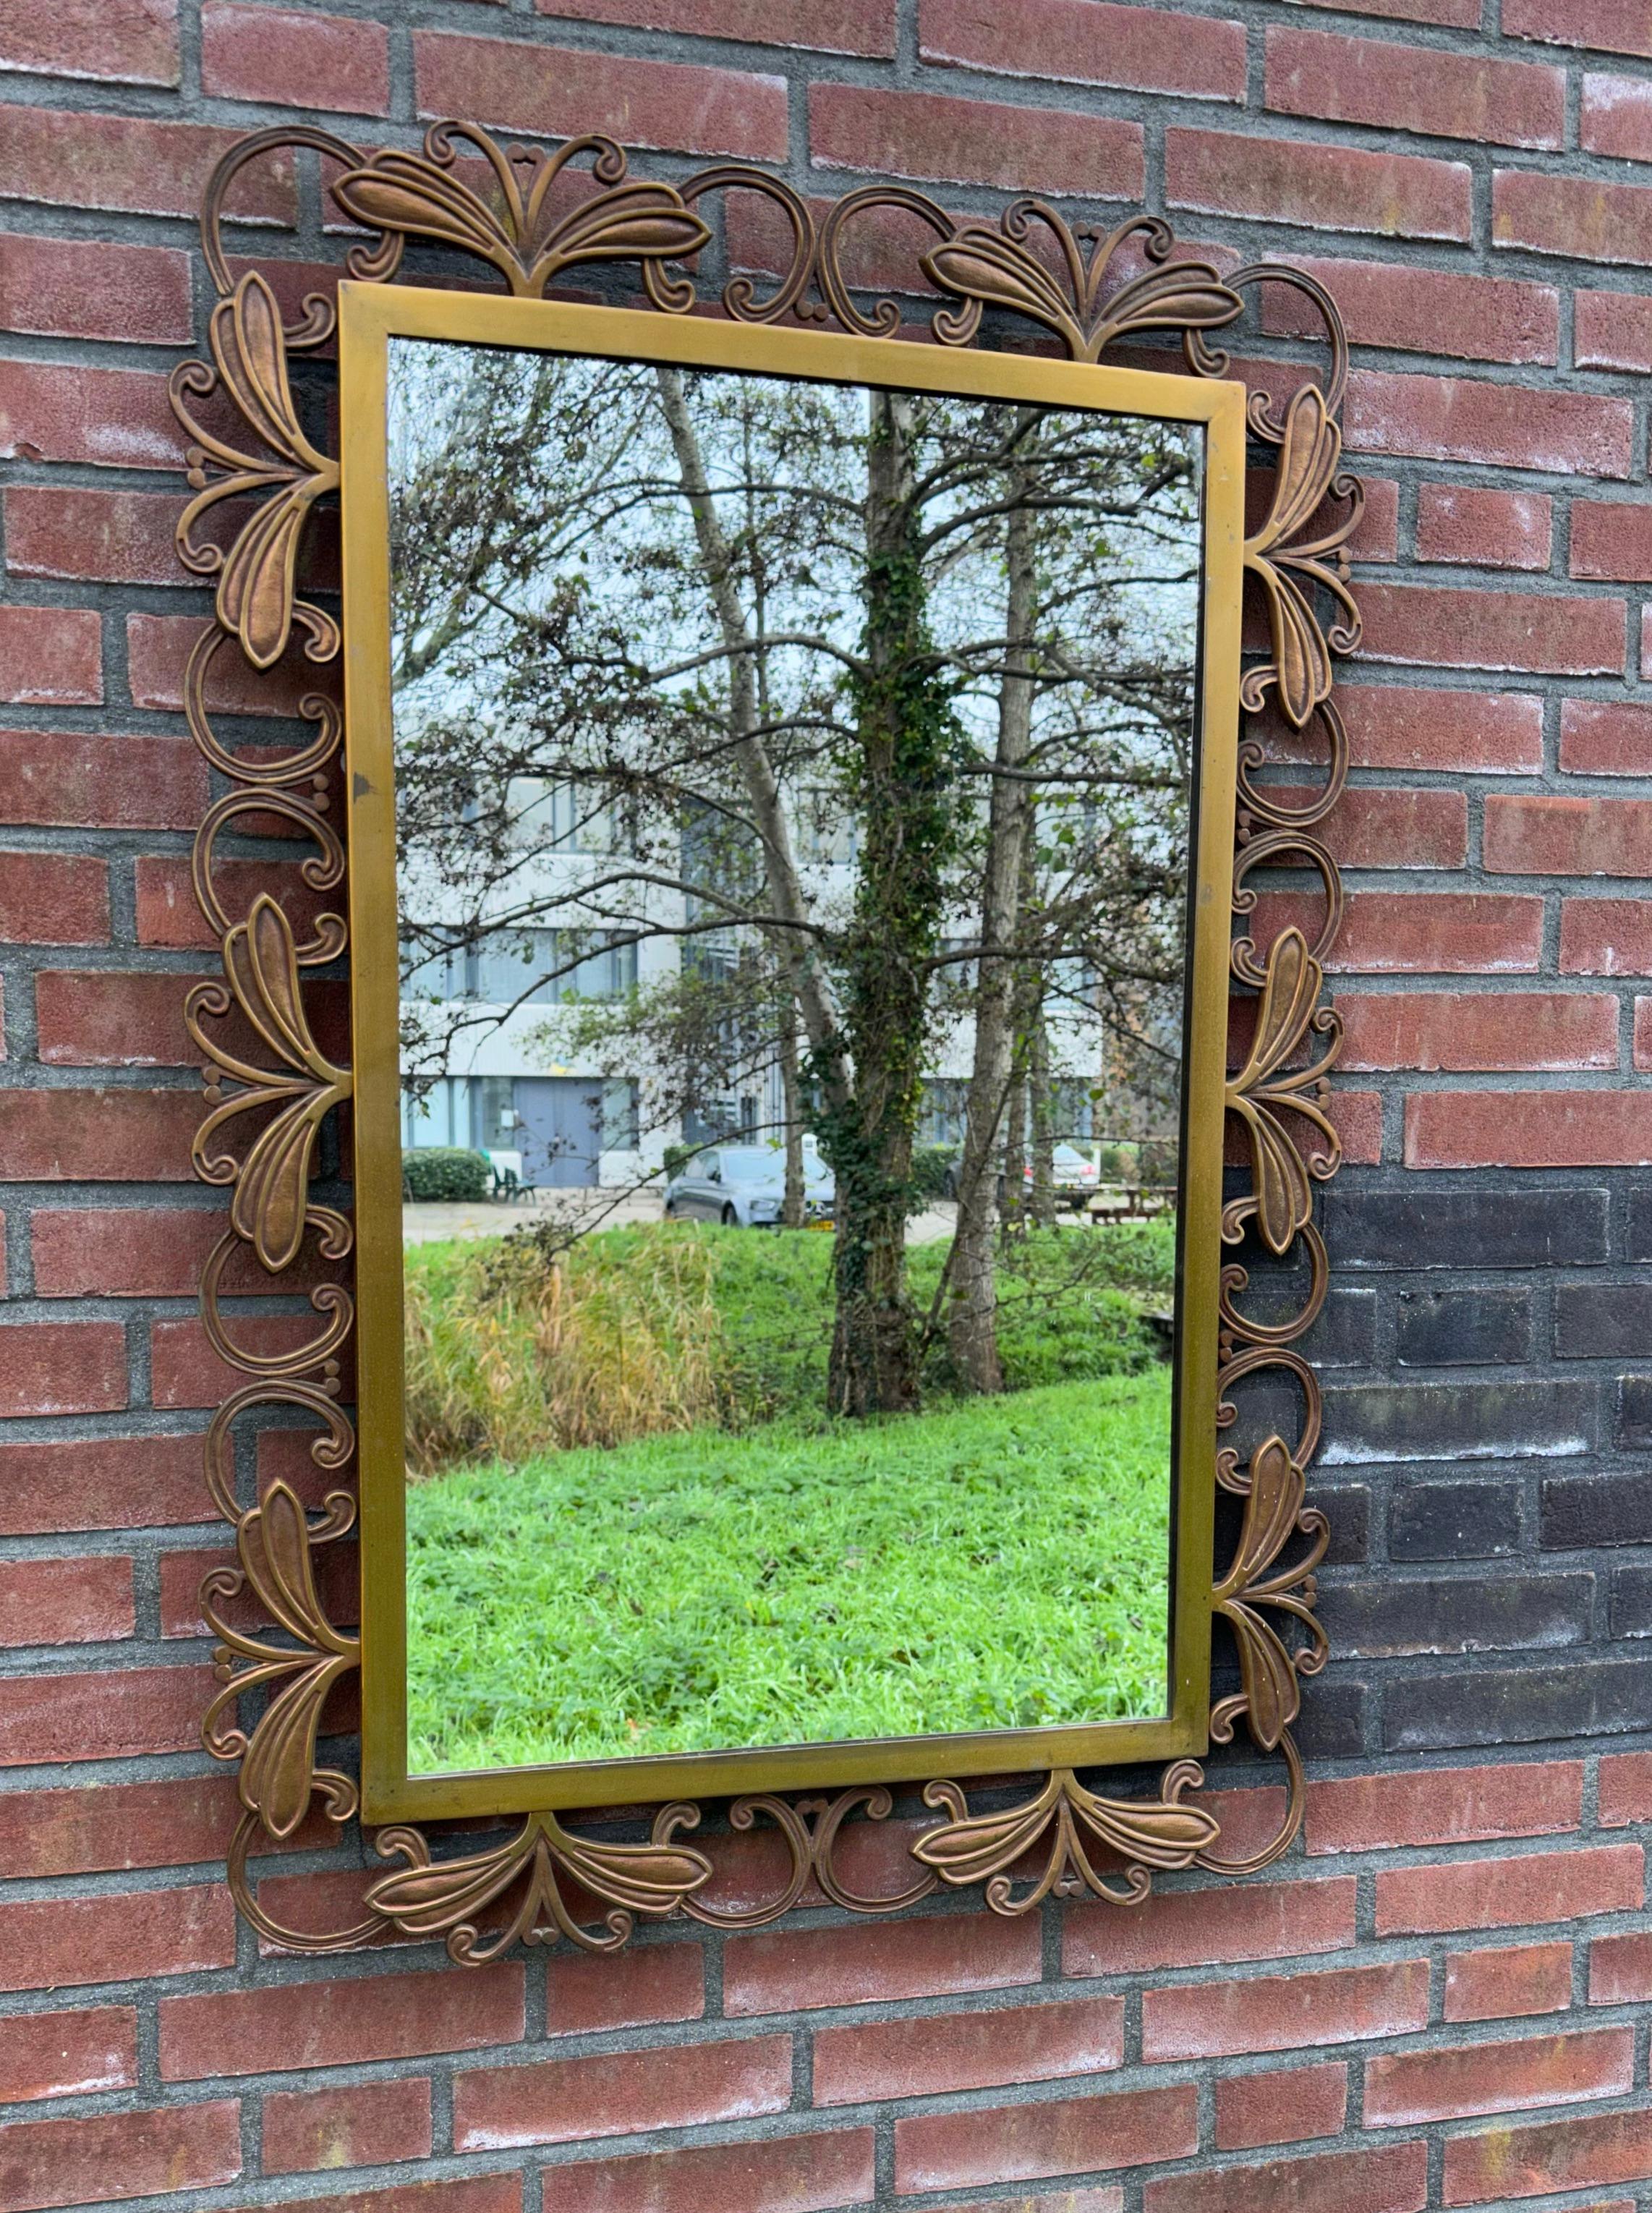 Large size and top quality bronze framed mirror in the Arts & Crafts (Jugendstil Style).

Over the years we have sold a number of great quality and unique mirrors and this fine specimen in the Jugendstil Style is right up there with the best. The